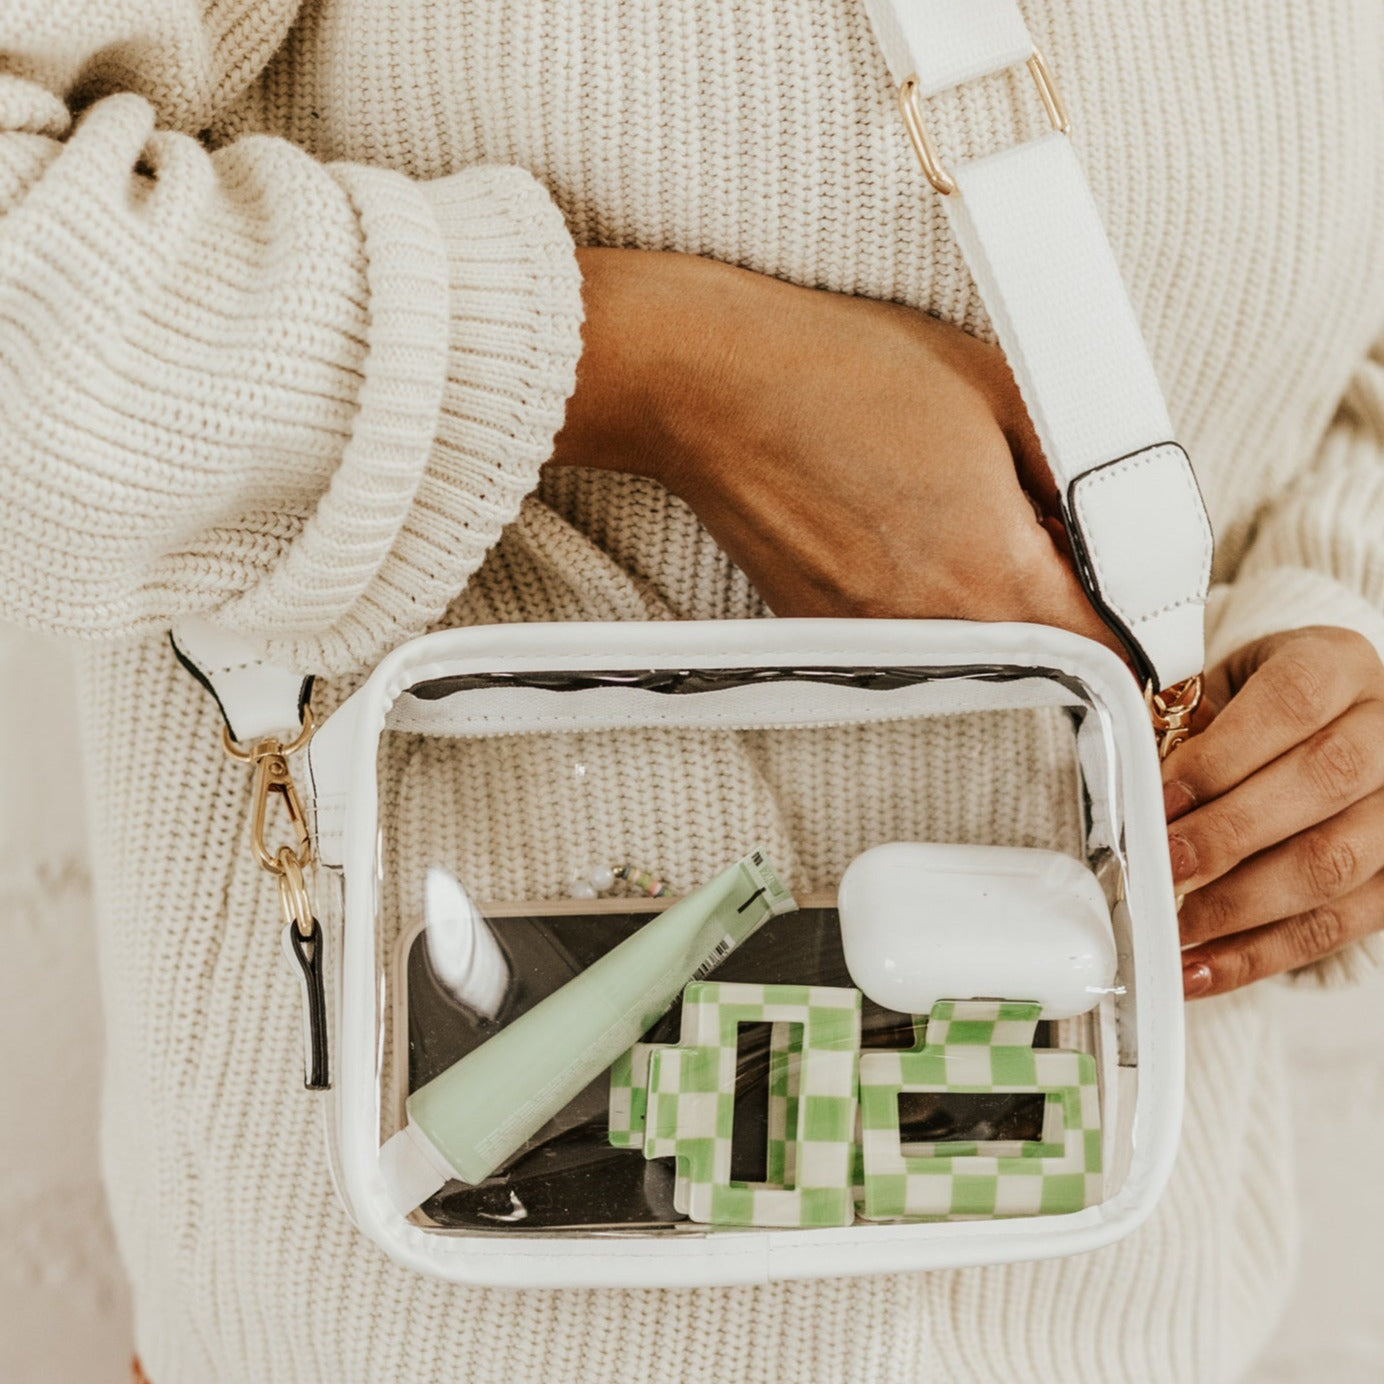 Girl wearing a cream colored sweater with a clear crossbody purse draped down her side. The purse has white lining around the edge and a white purse strap. Inside the bag is an iPhone, two small green and white checkered hair clips, a small tube of green packaged hand cream, and a set of AirPod pros.